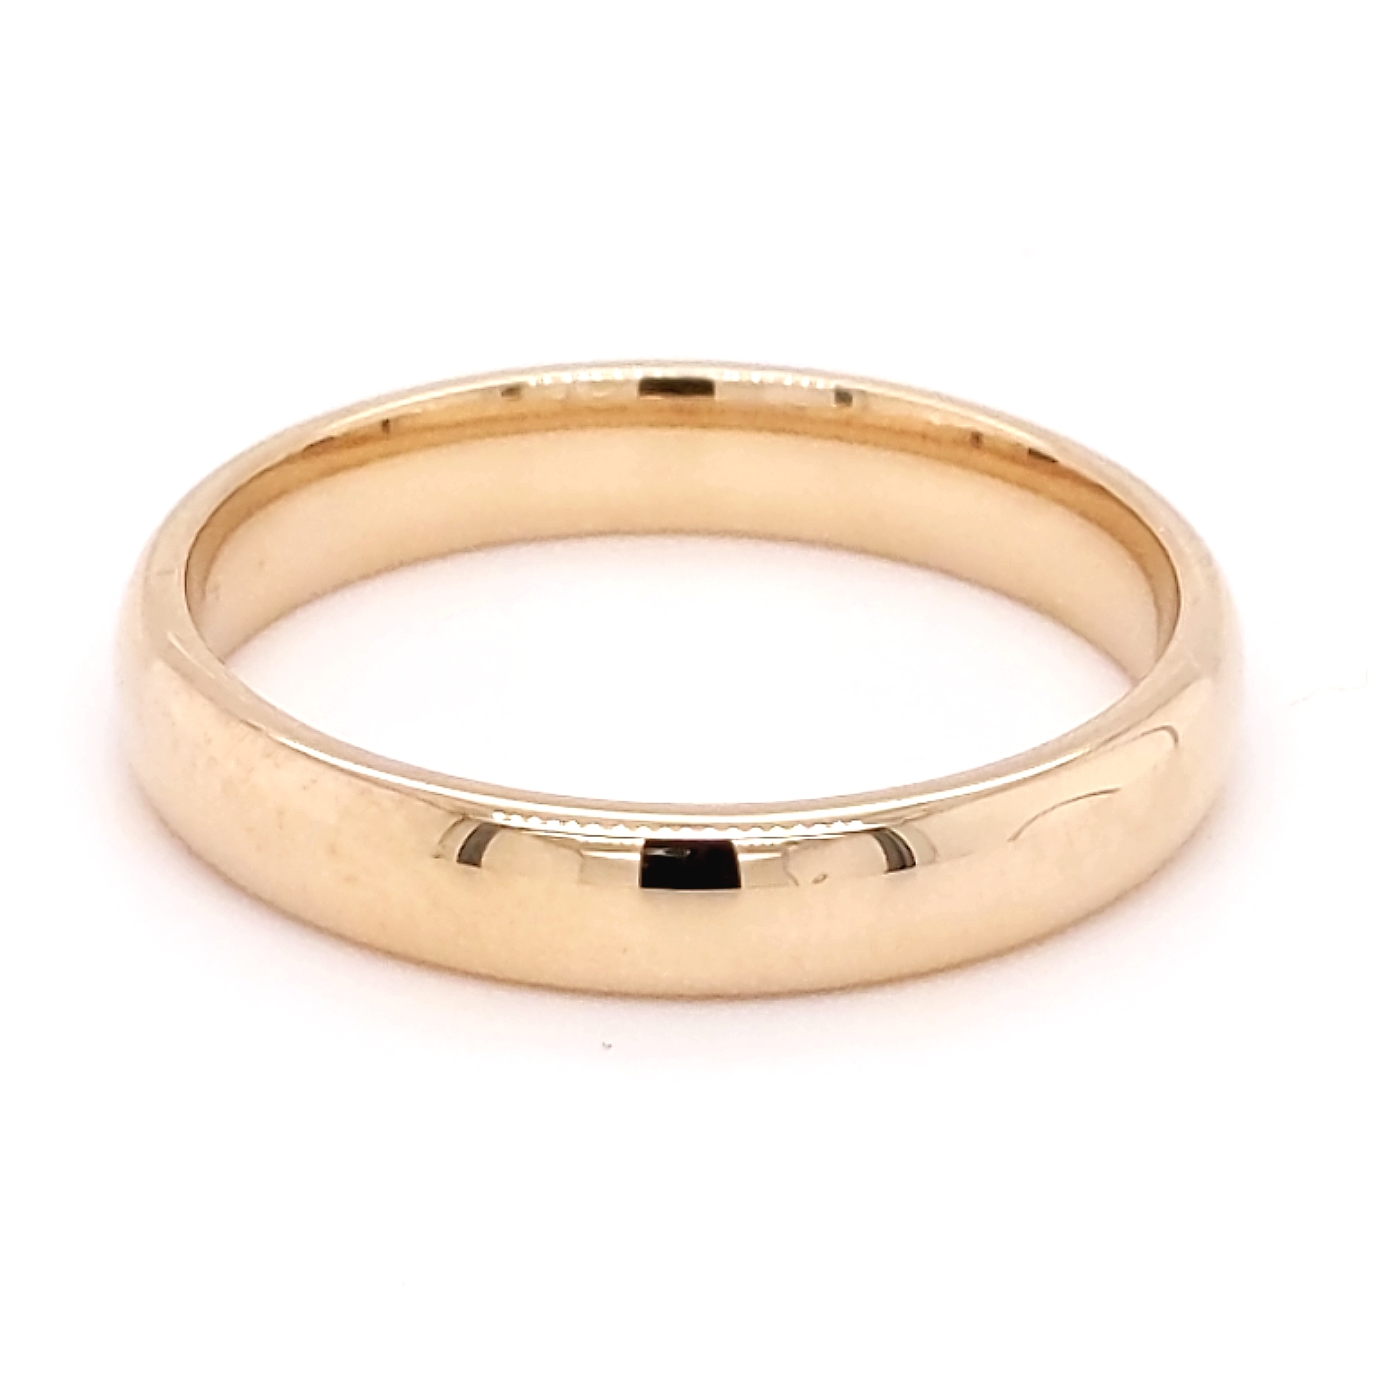 14K Yellow Gold 4mm wide band finger size 11.25